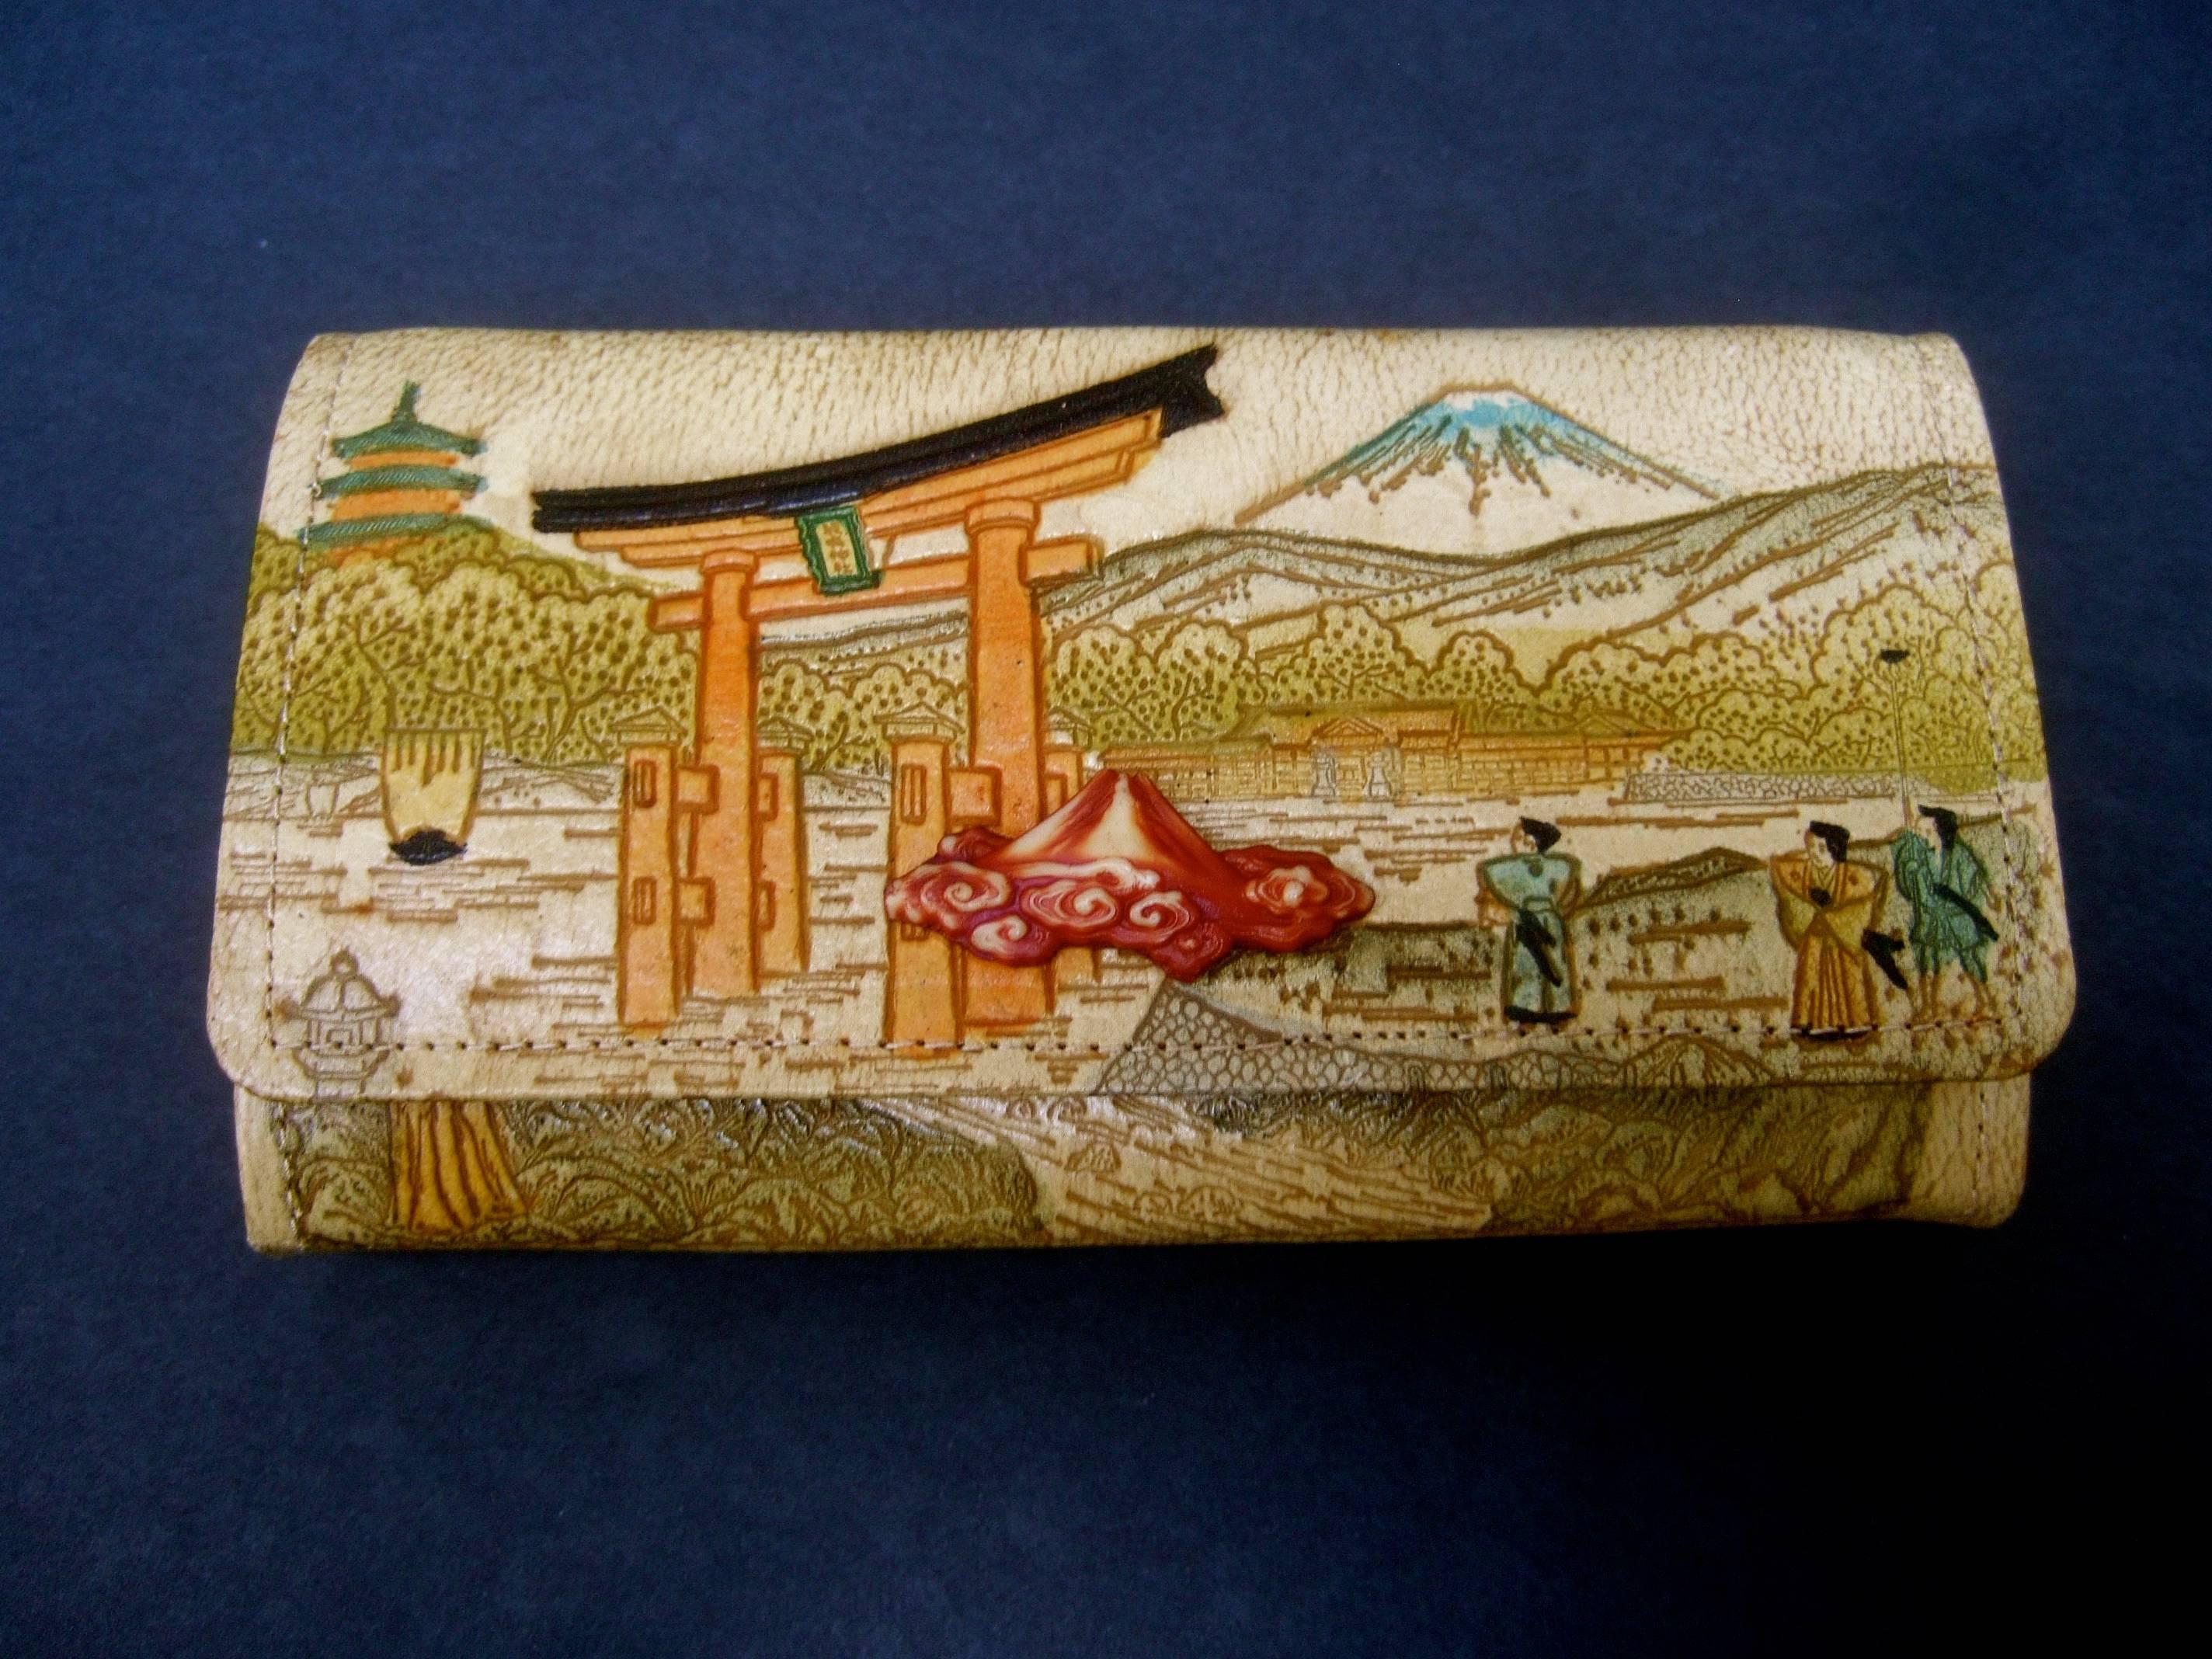 Exotic Japanese tooled leather clutch / wallet ca 1960
The unique clutch / wallet is decorated with a tooled 
leather scene illustrated with Japanese iconography;  
ceremonial figures, a pagoda structure and mountain peaks   

The tooled leather